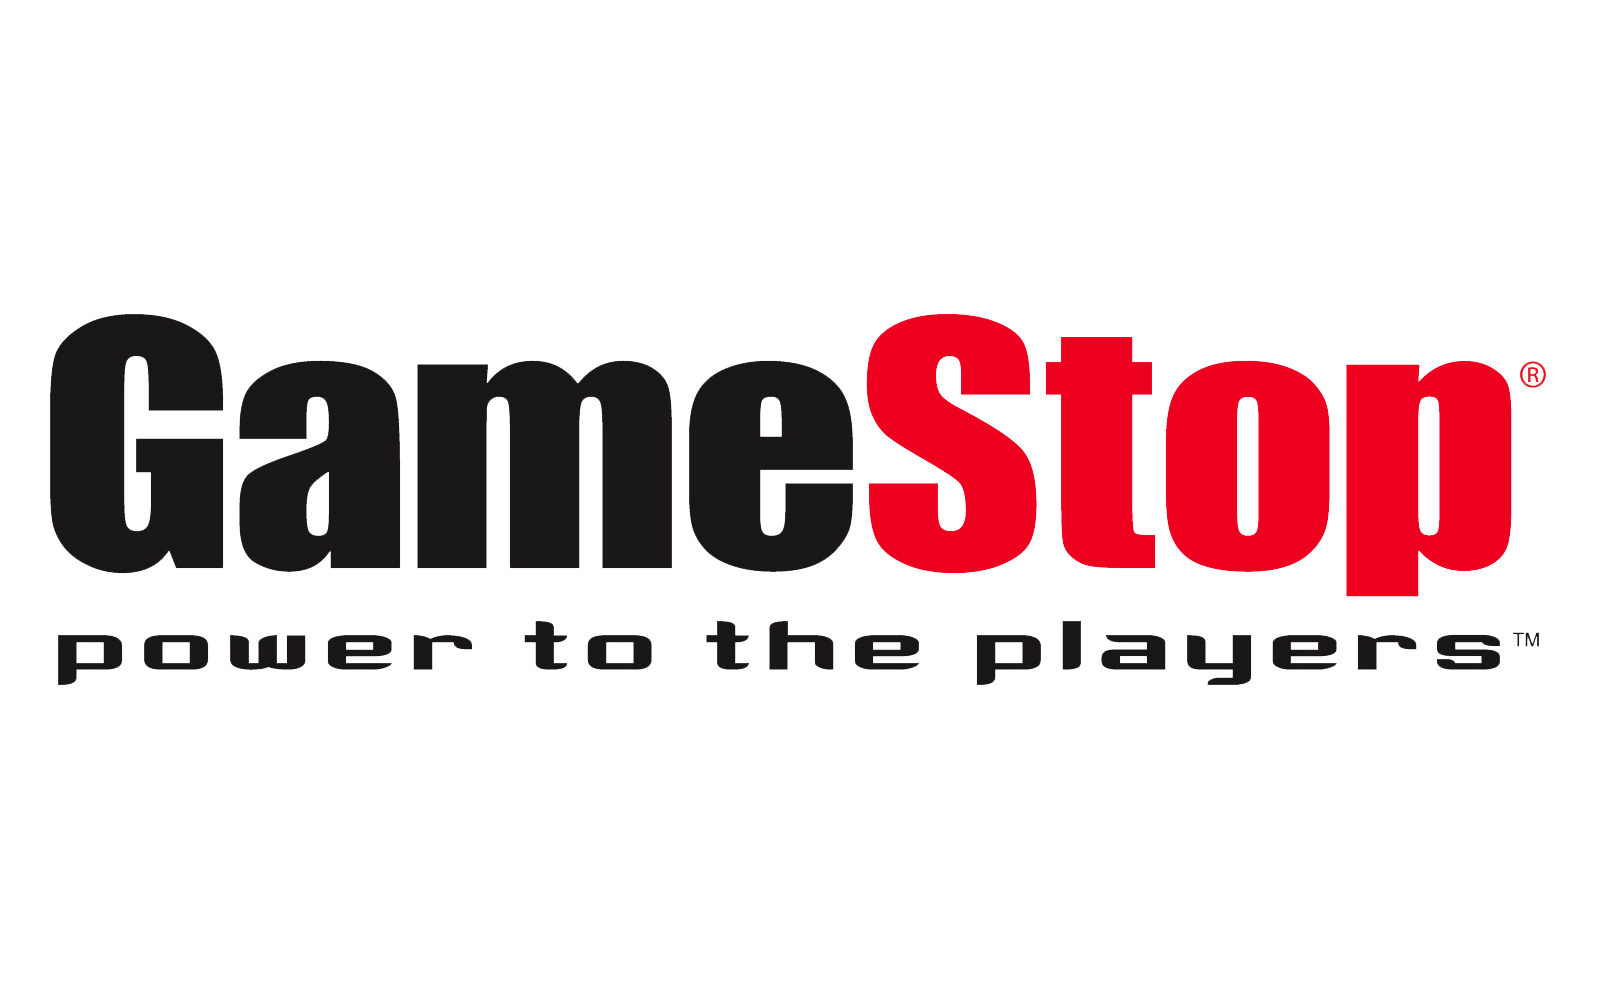 GAMESTOP Becoming a “Technology Company”